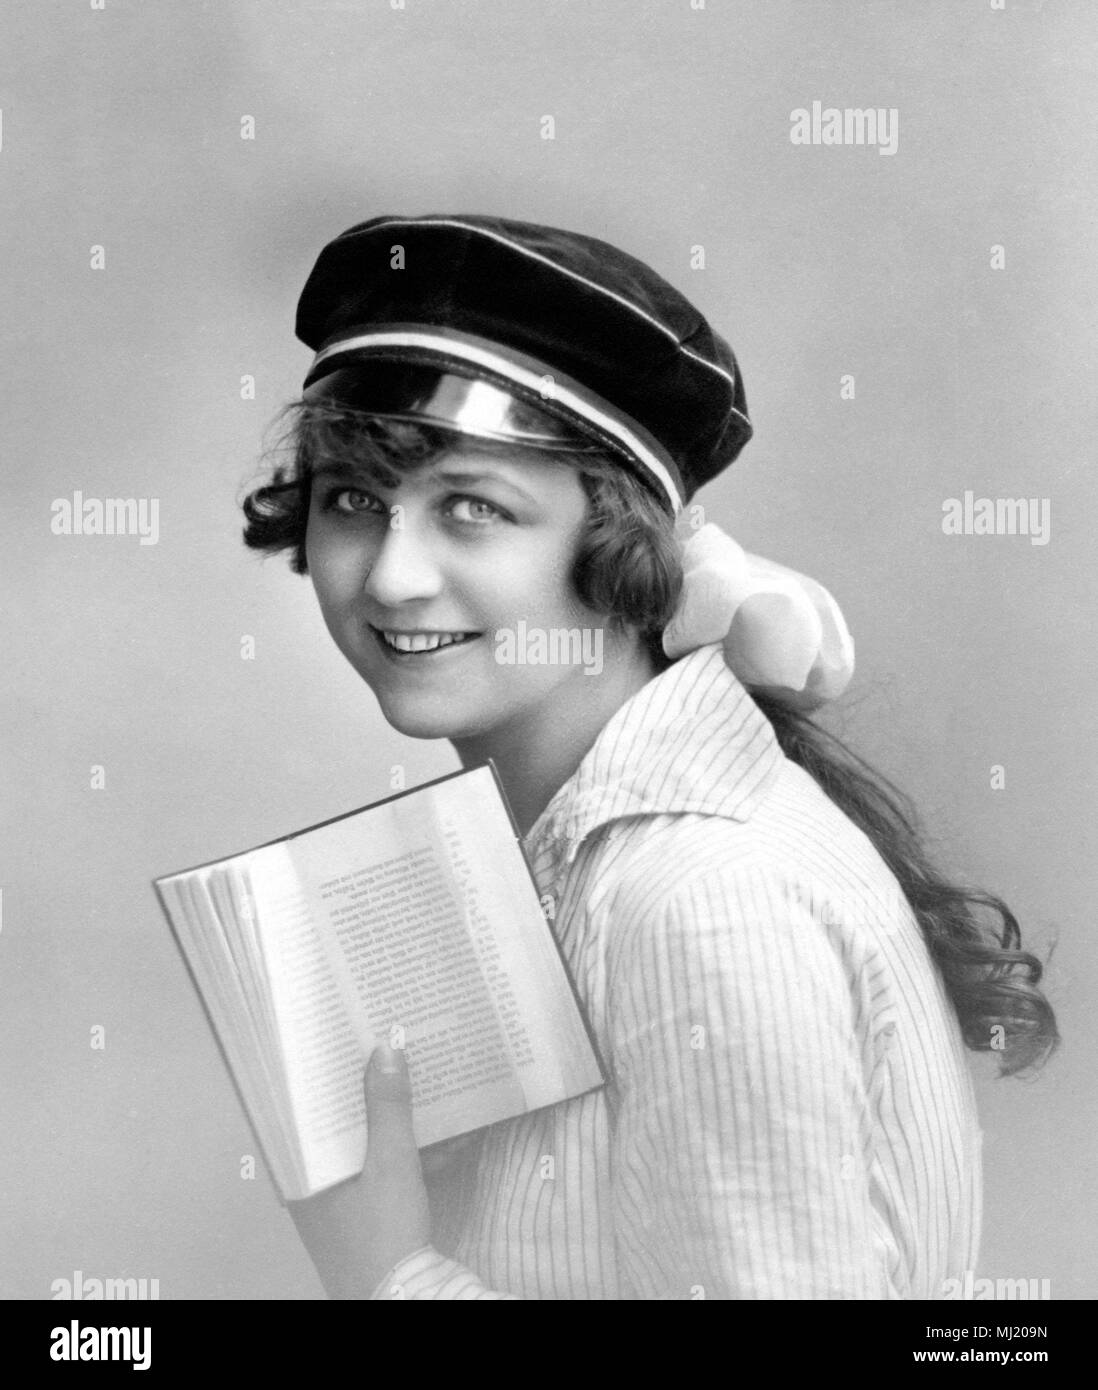 Woman with student hat reading a book, 1920s, Germany Stock Photo